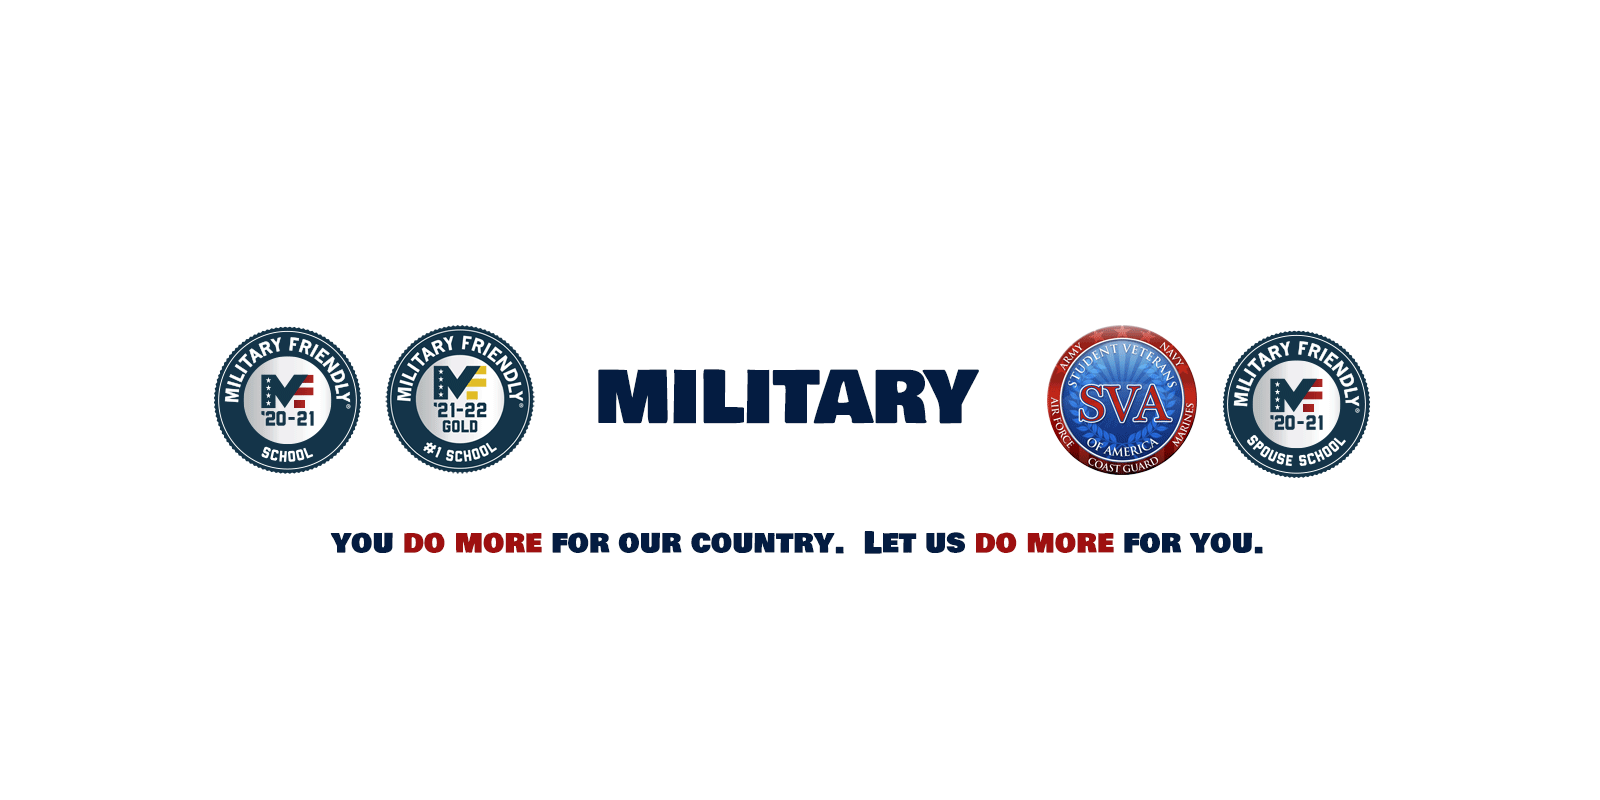 MILITARY - You DO MORE for our country. Let us DO MORE for you.